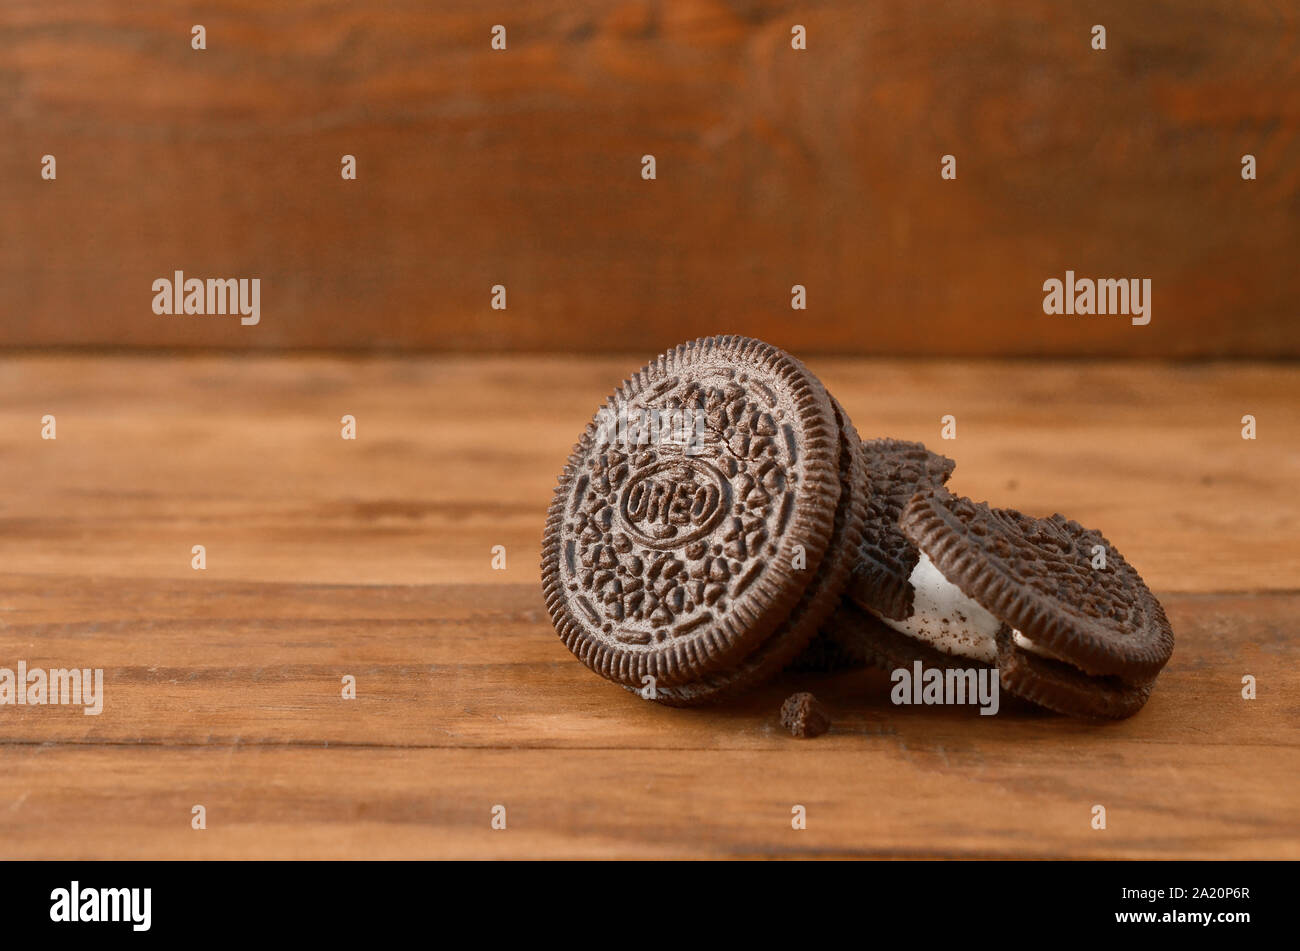 KHARKOV, UKRAINE - SEPTEMBER 8, 2019: Many OREO sandwich cream biscuits on wooden background. Oreo is a sandwich cookie with a sweet cream is the best Stock Photo